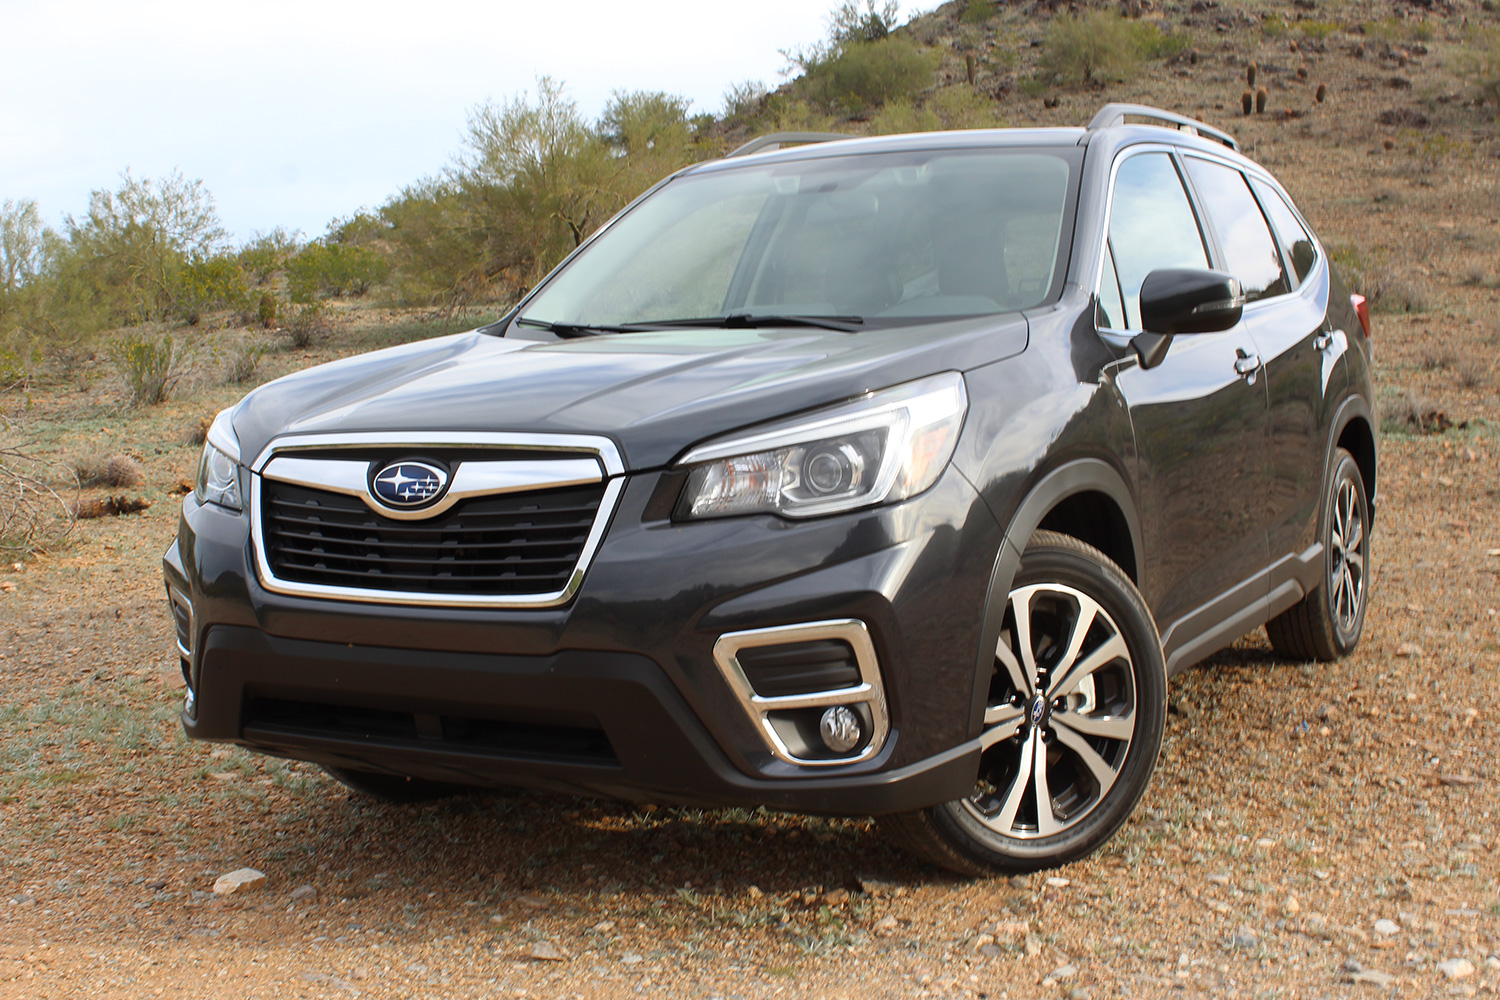 subaru forester modelo 2019 revision review front angle